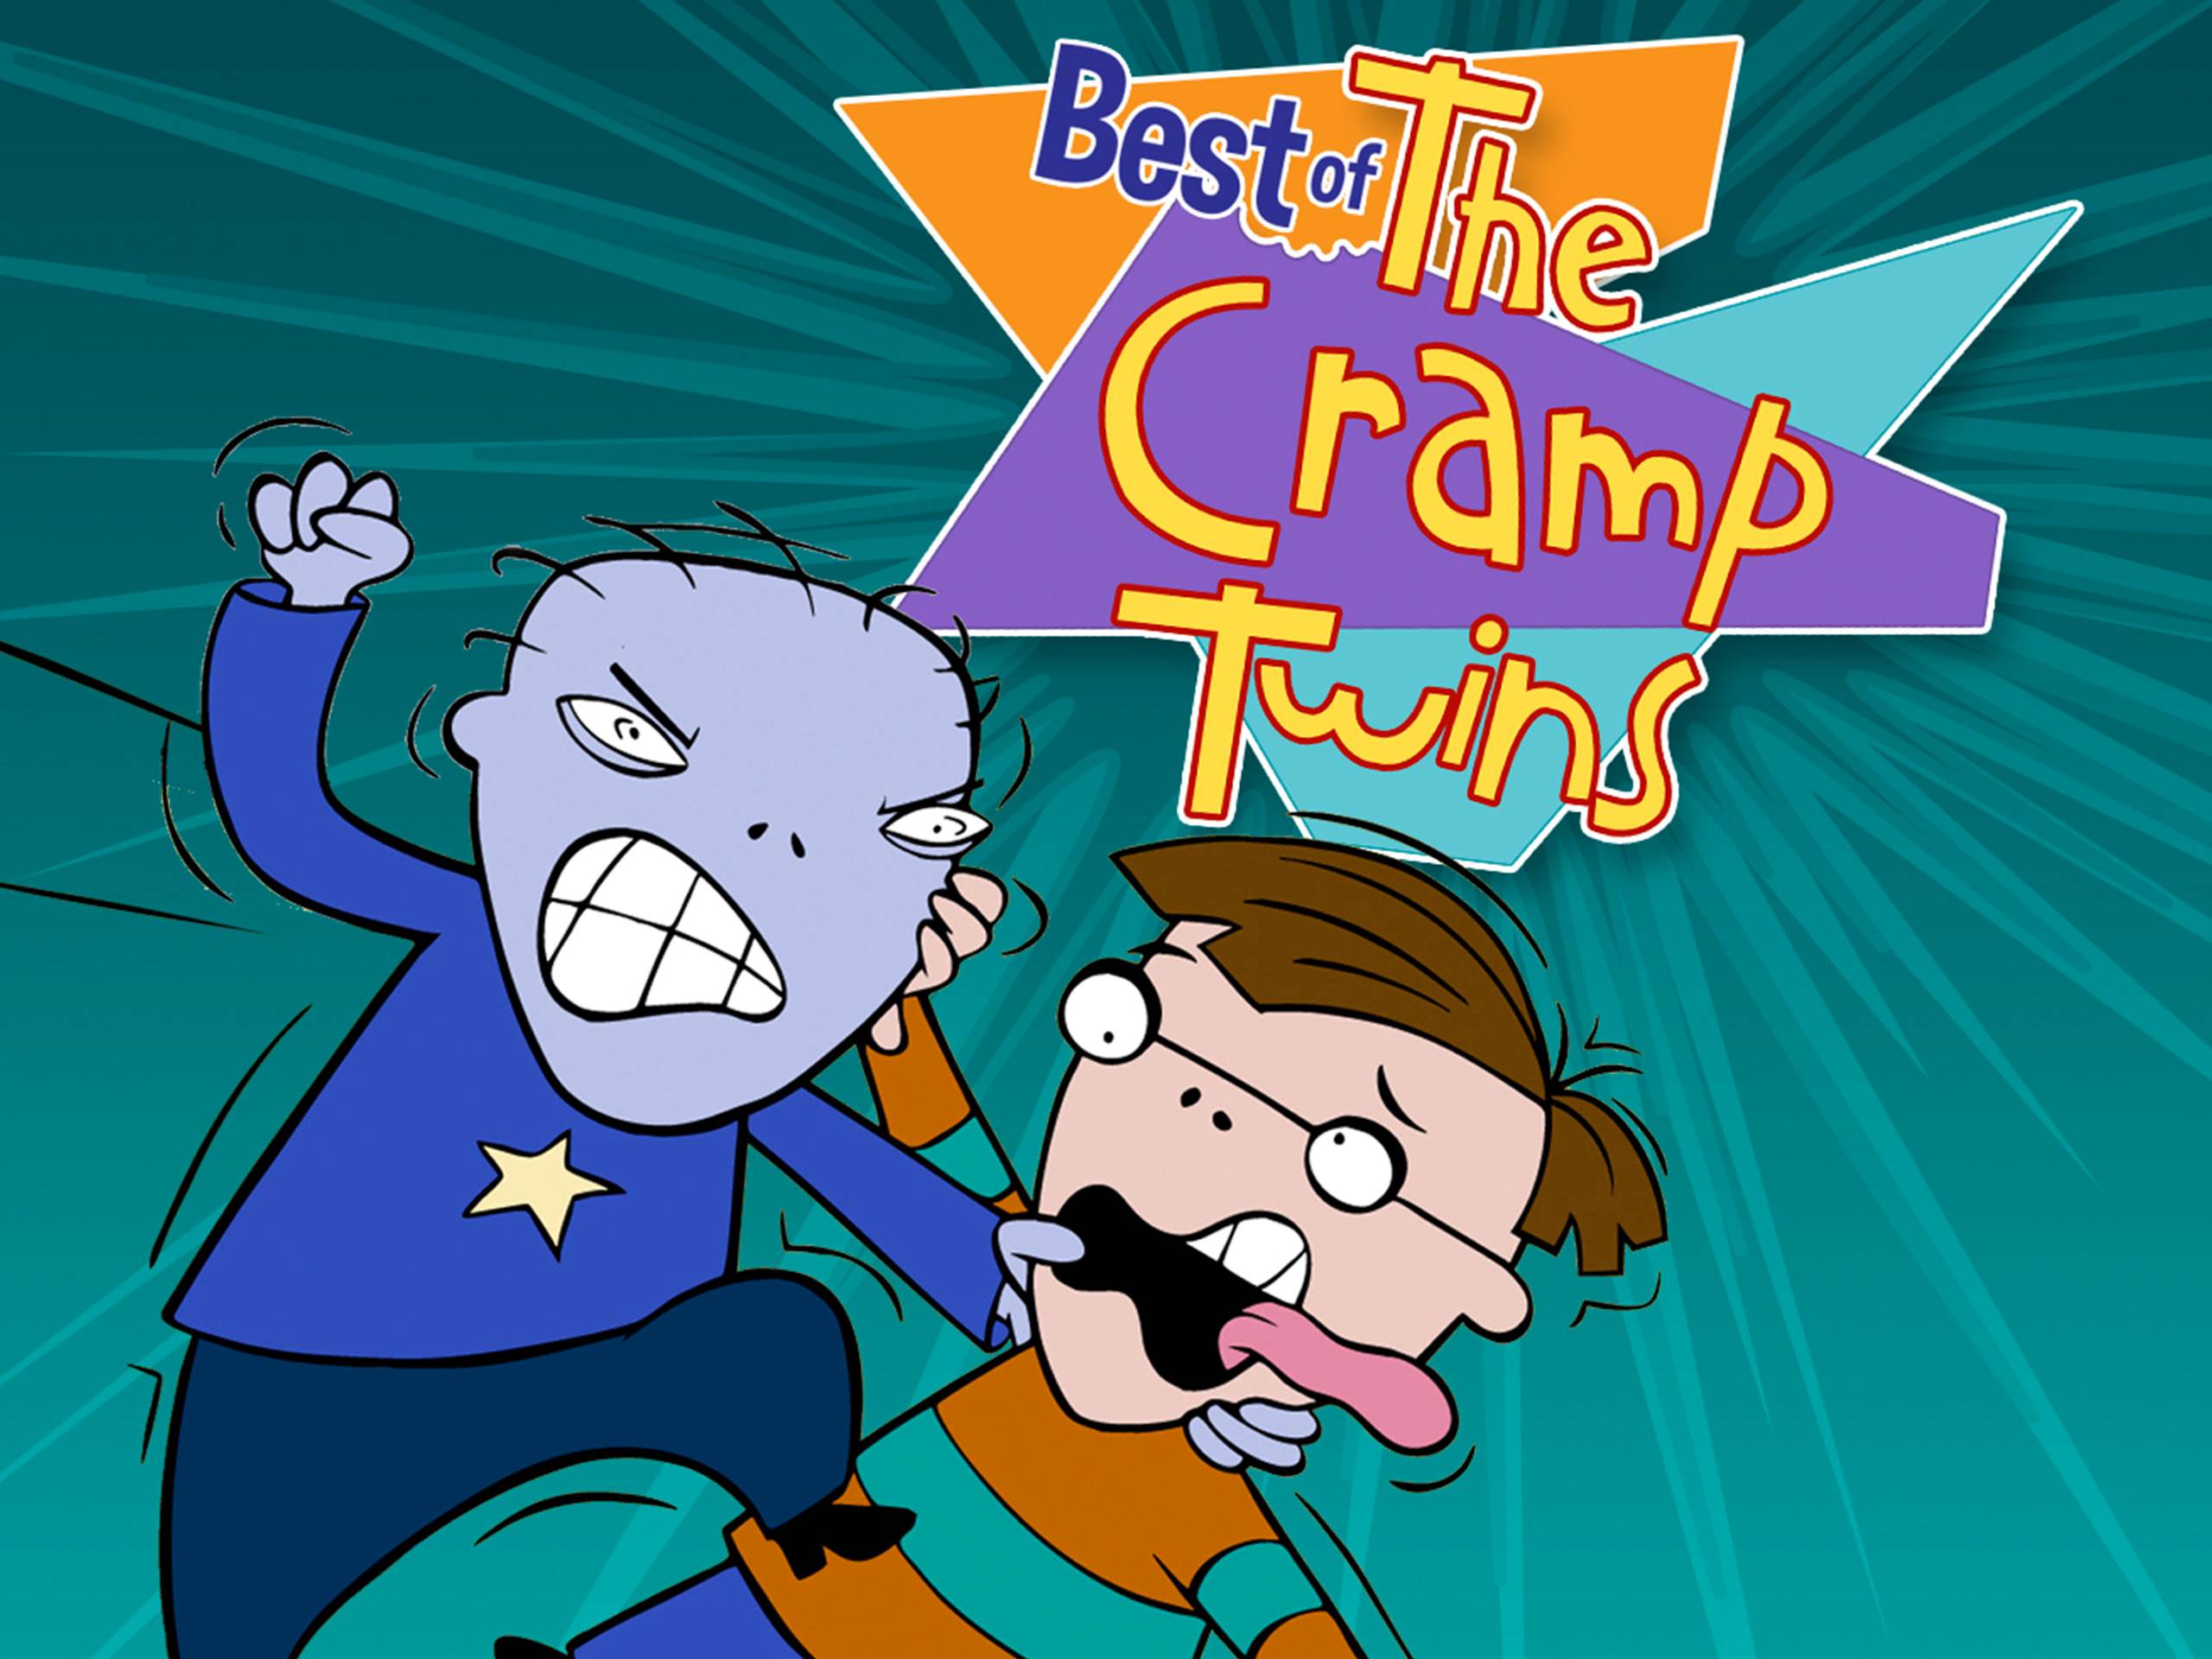 23 Facts About Wayne Cramp (The Cramp Twins) - Facts.net